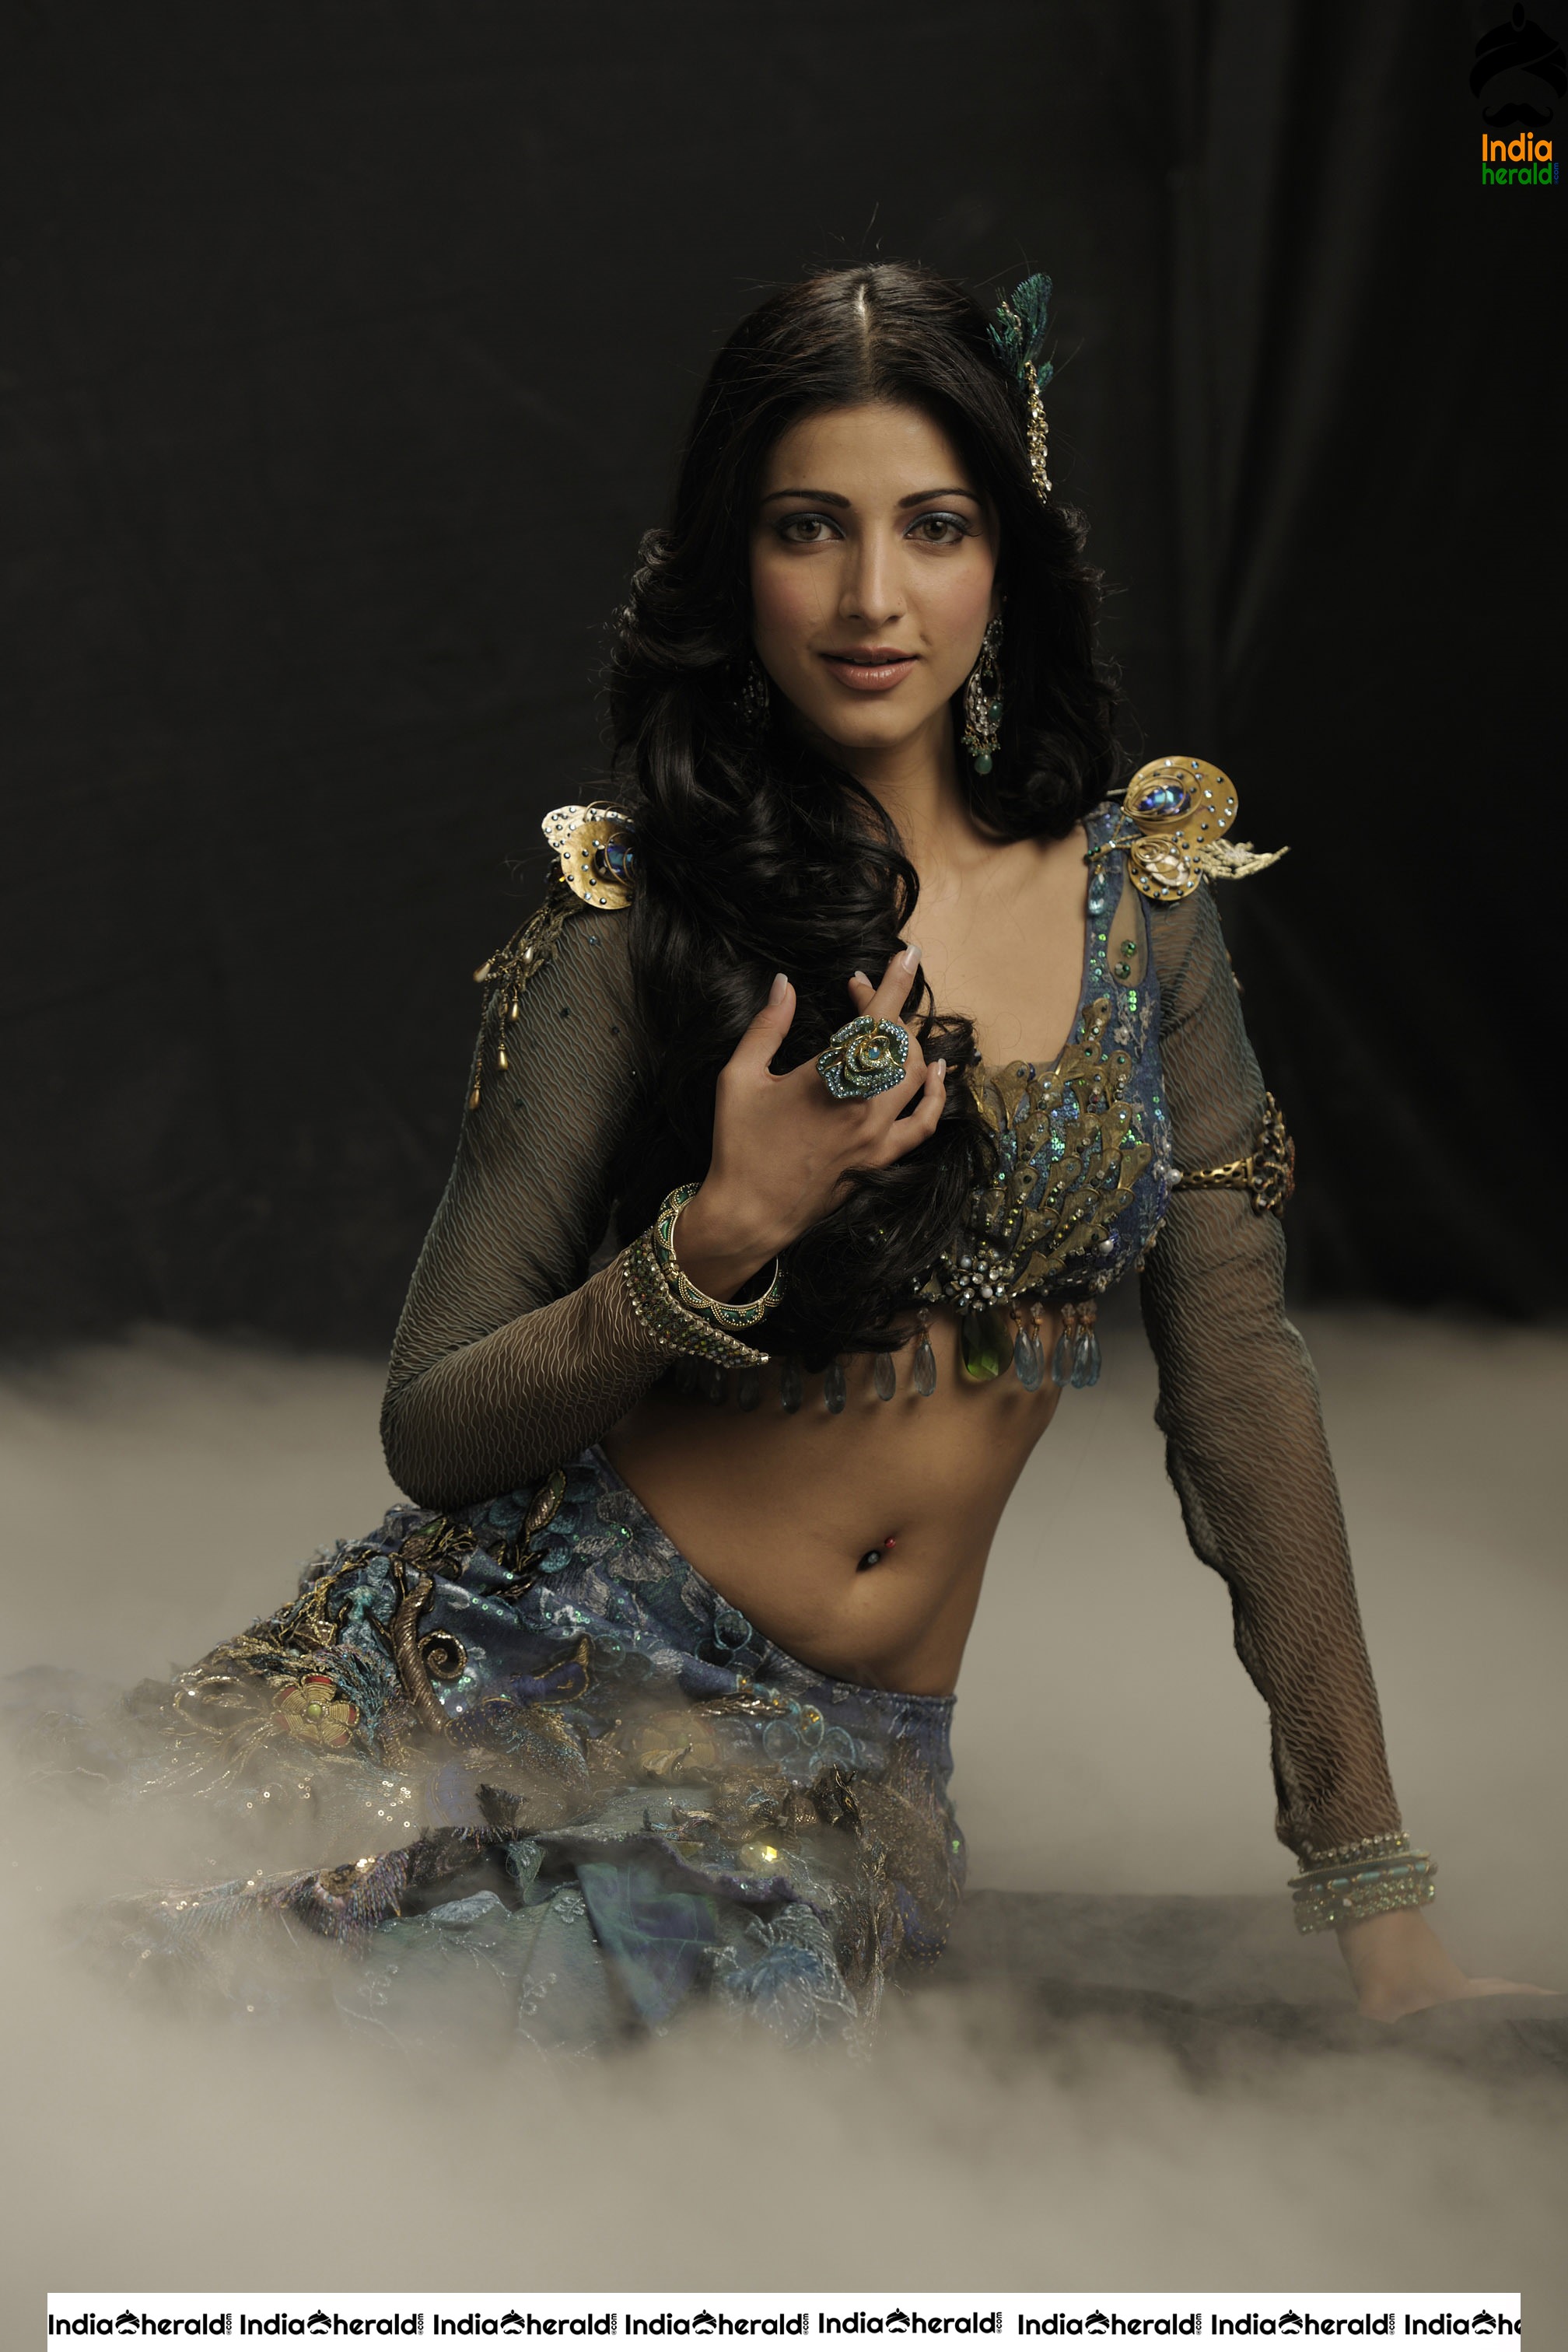 Shruti Haasan exposes her Hot Milky Midriff and Teasing Navel in these Unseen Photos